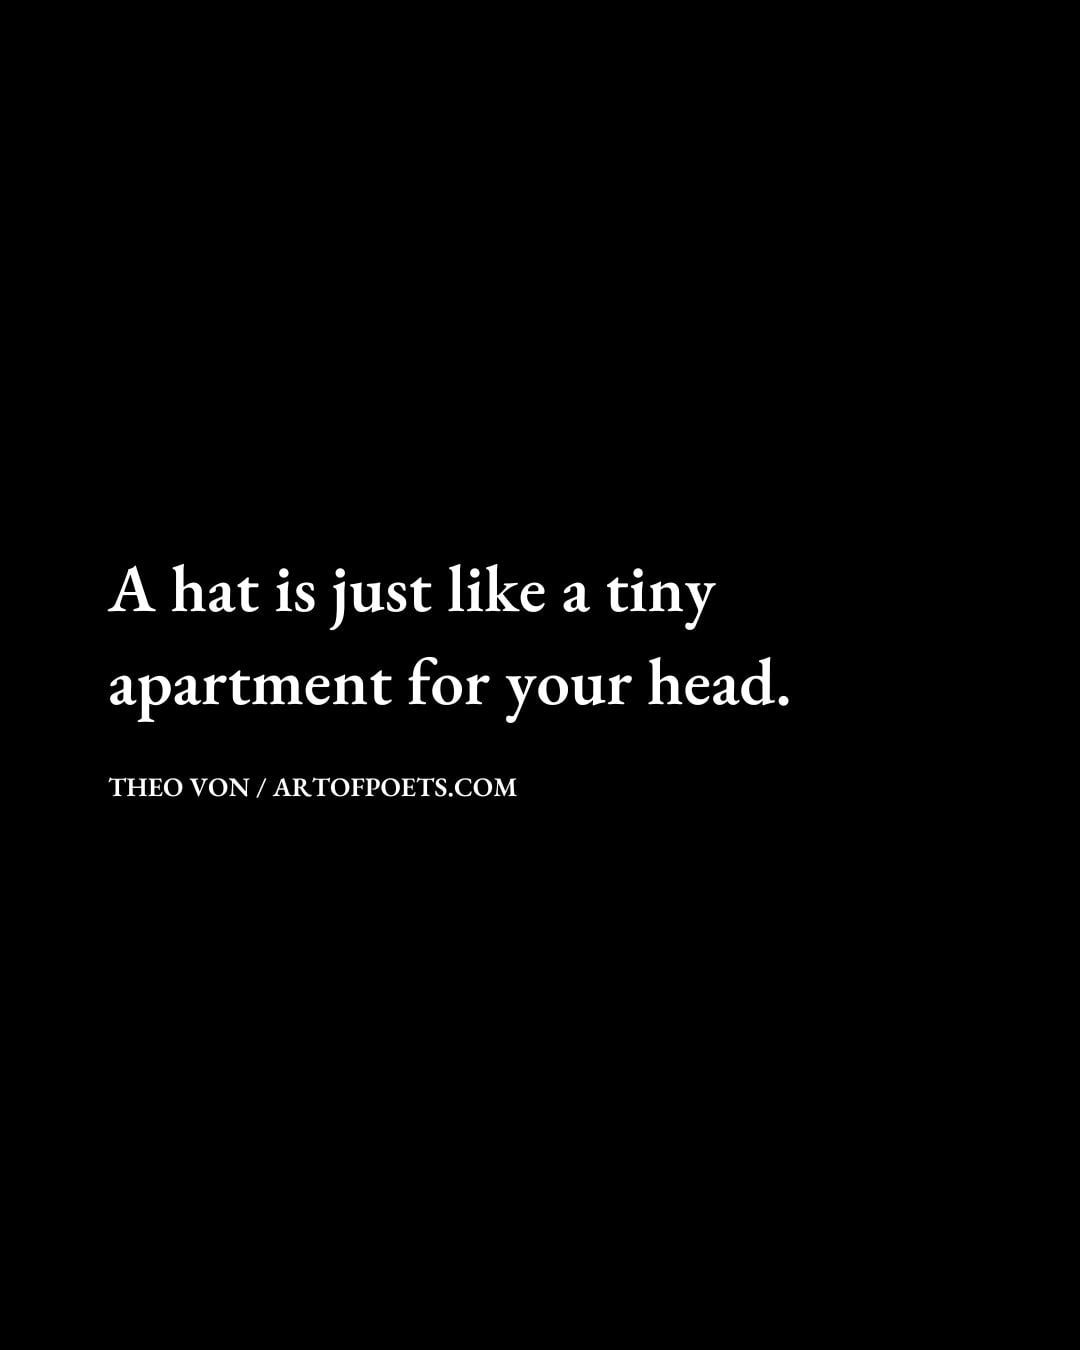 A hat is just like a tiny apartment for your head